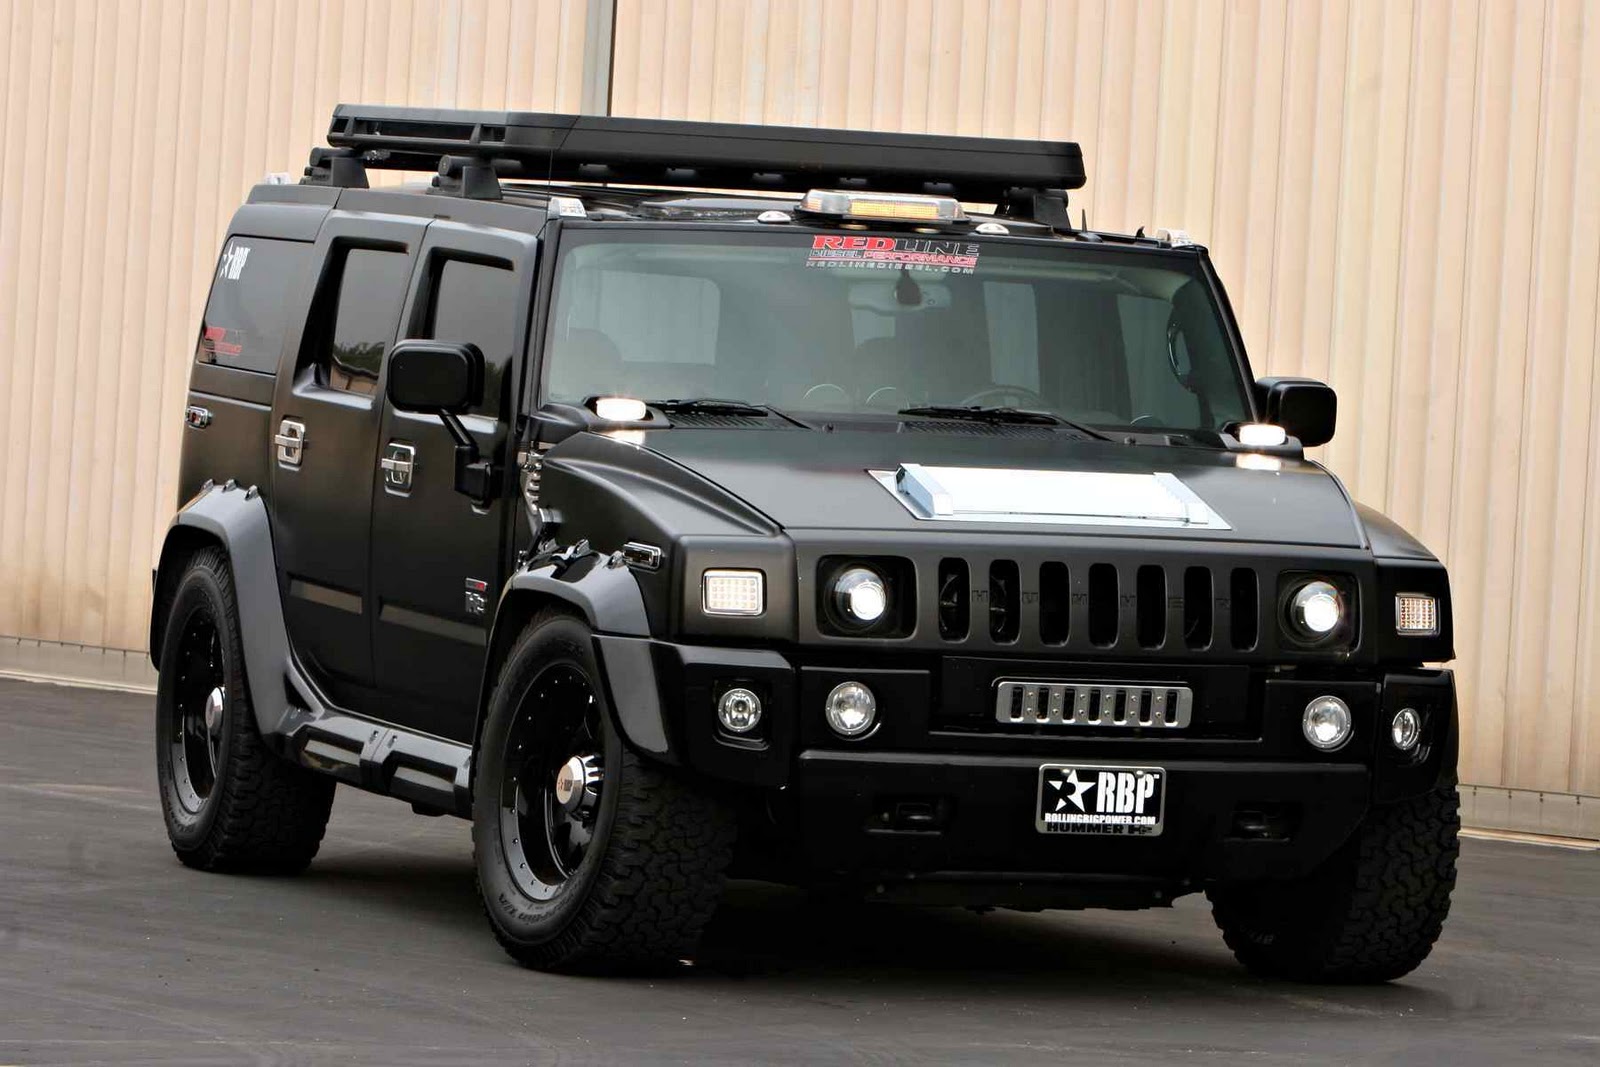 Hummer H3 2011 Reviews Pictures Price Specs features and Top Speed